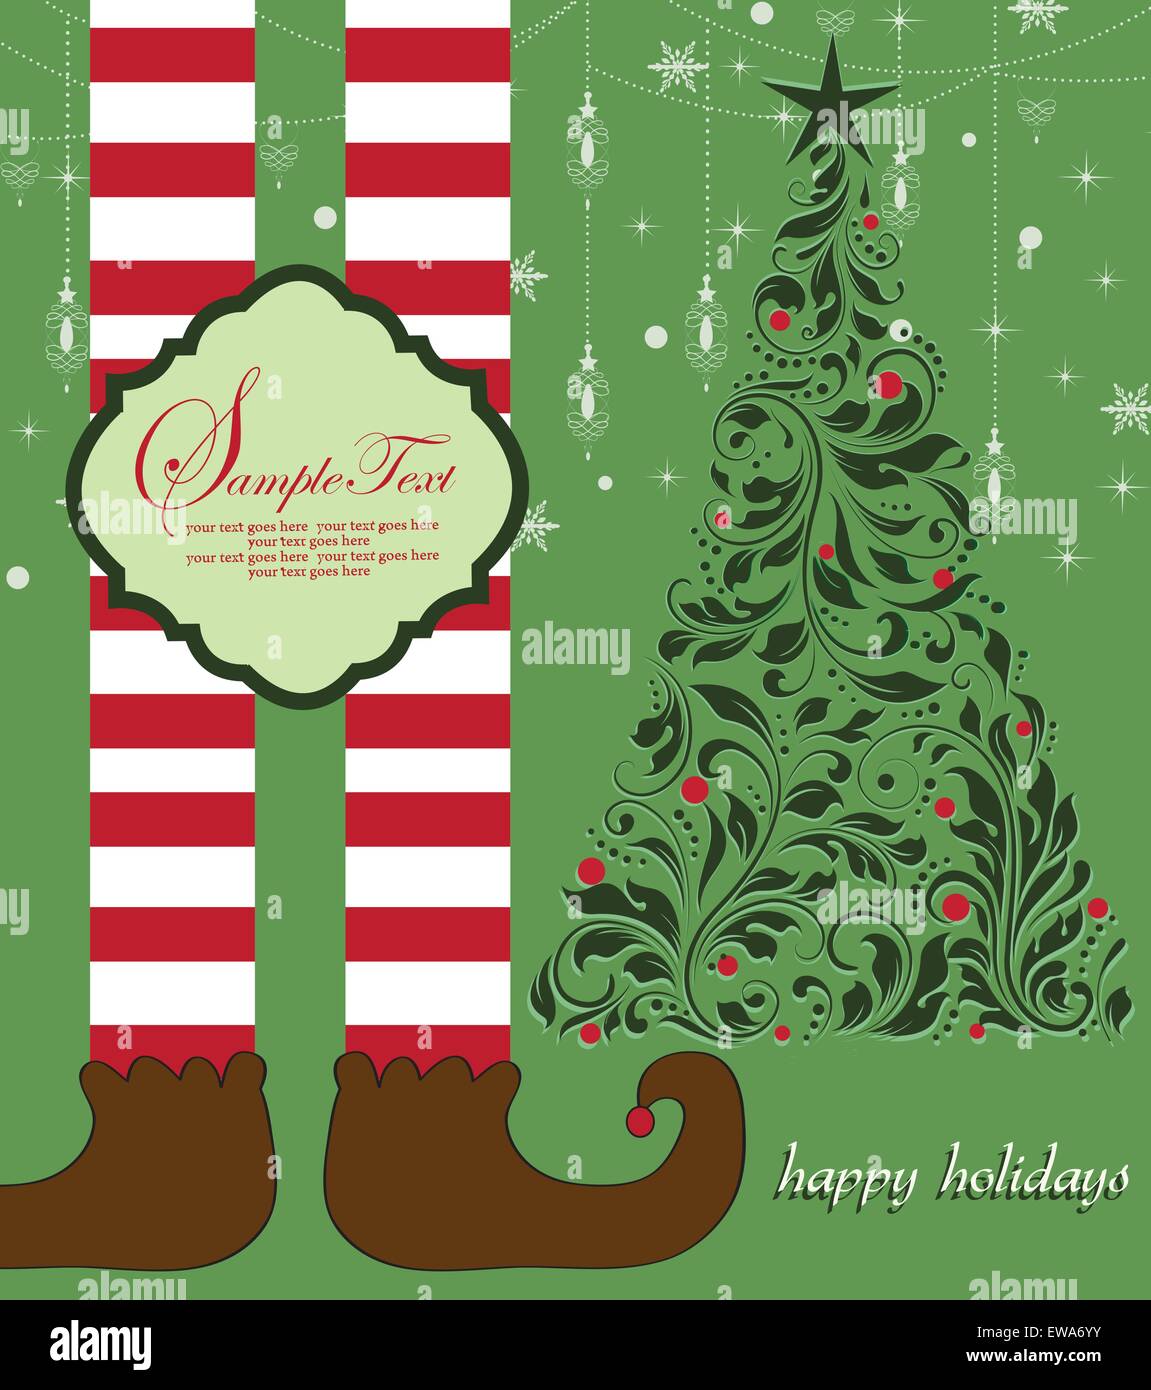 Vintage Christmas card with ornate elegant retro abstract floral design, elf legs with brown shoes and red striped stockings Stock Vector